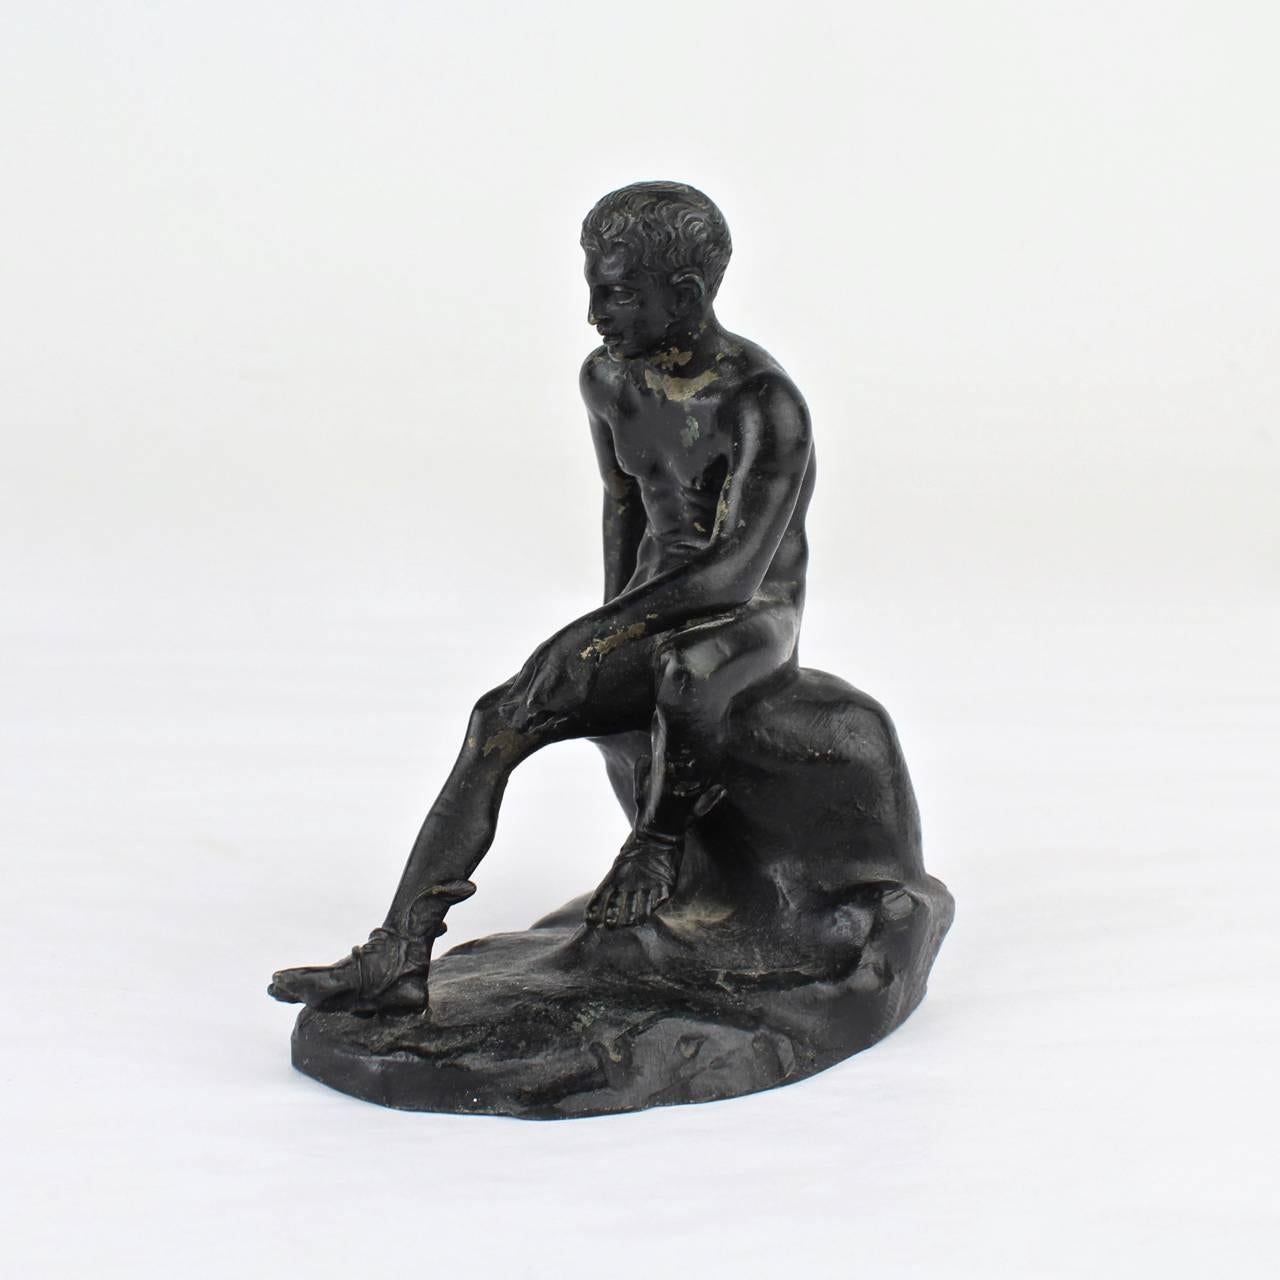 A very fine cabinet-sized Italian Grand Tour bronze sculpture of a seated Hermes (or Mercury) after Lysippos. 

This was an extraordinarily popular model in the 19th century. The original had been unearthed at the Villa of the Papyri in